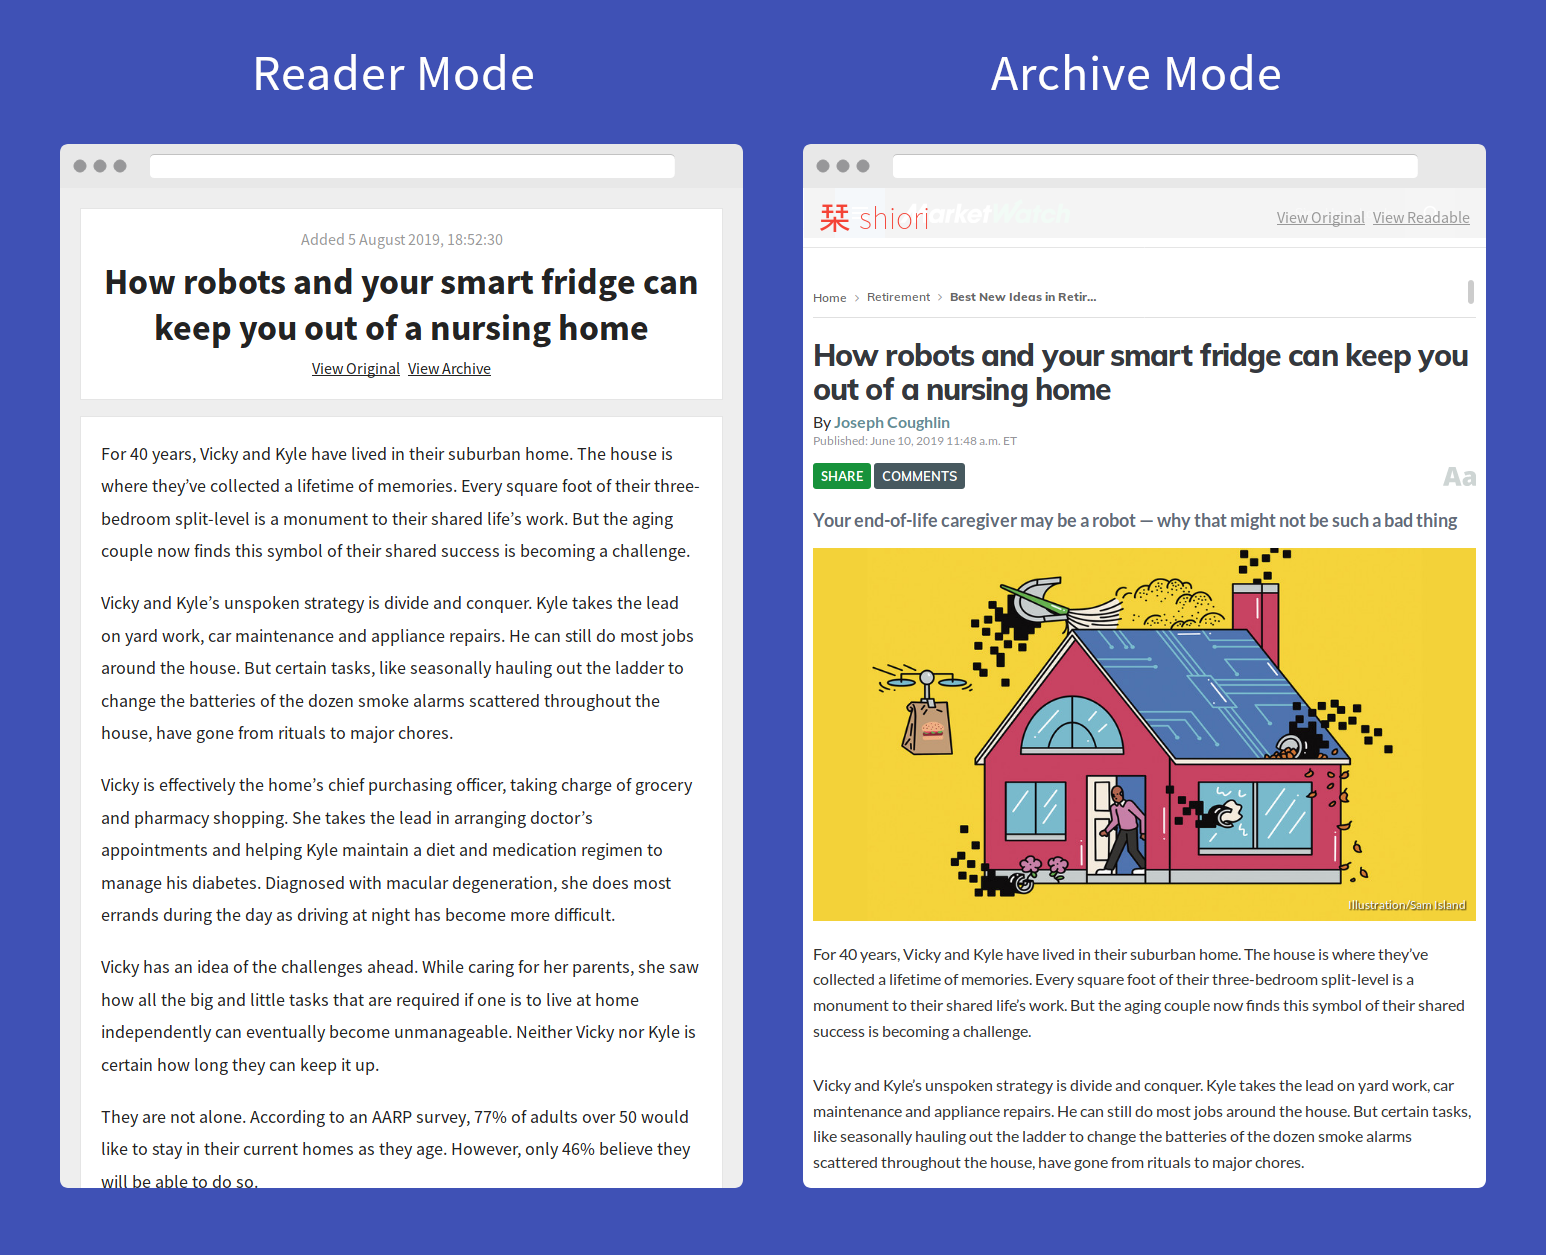 Comparison of reader mode and archive mode